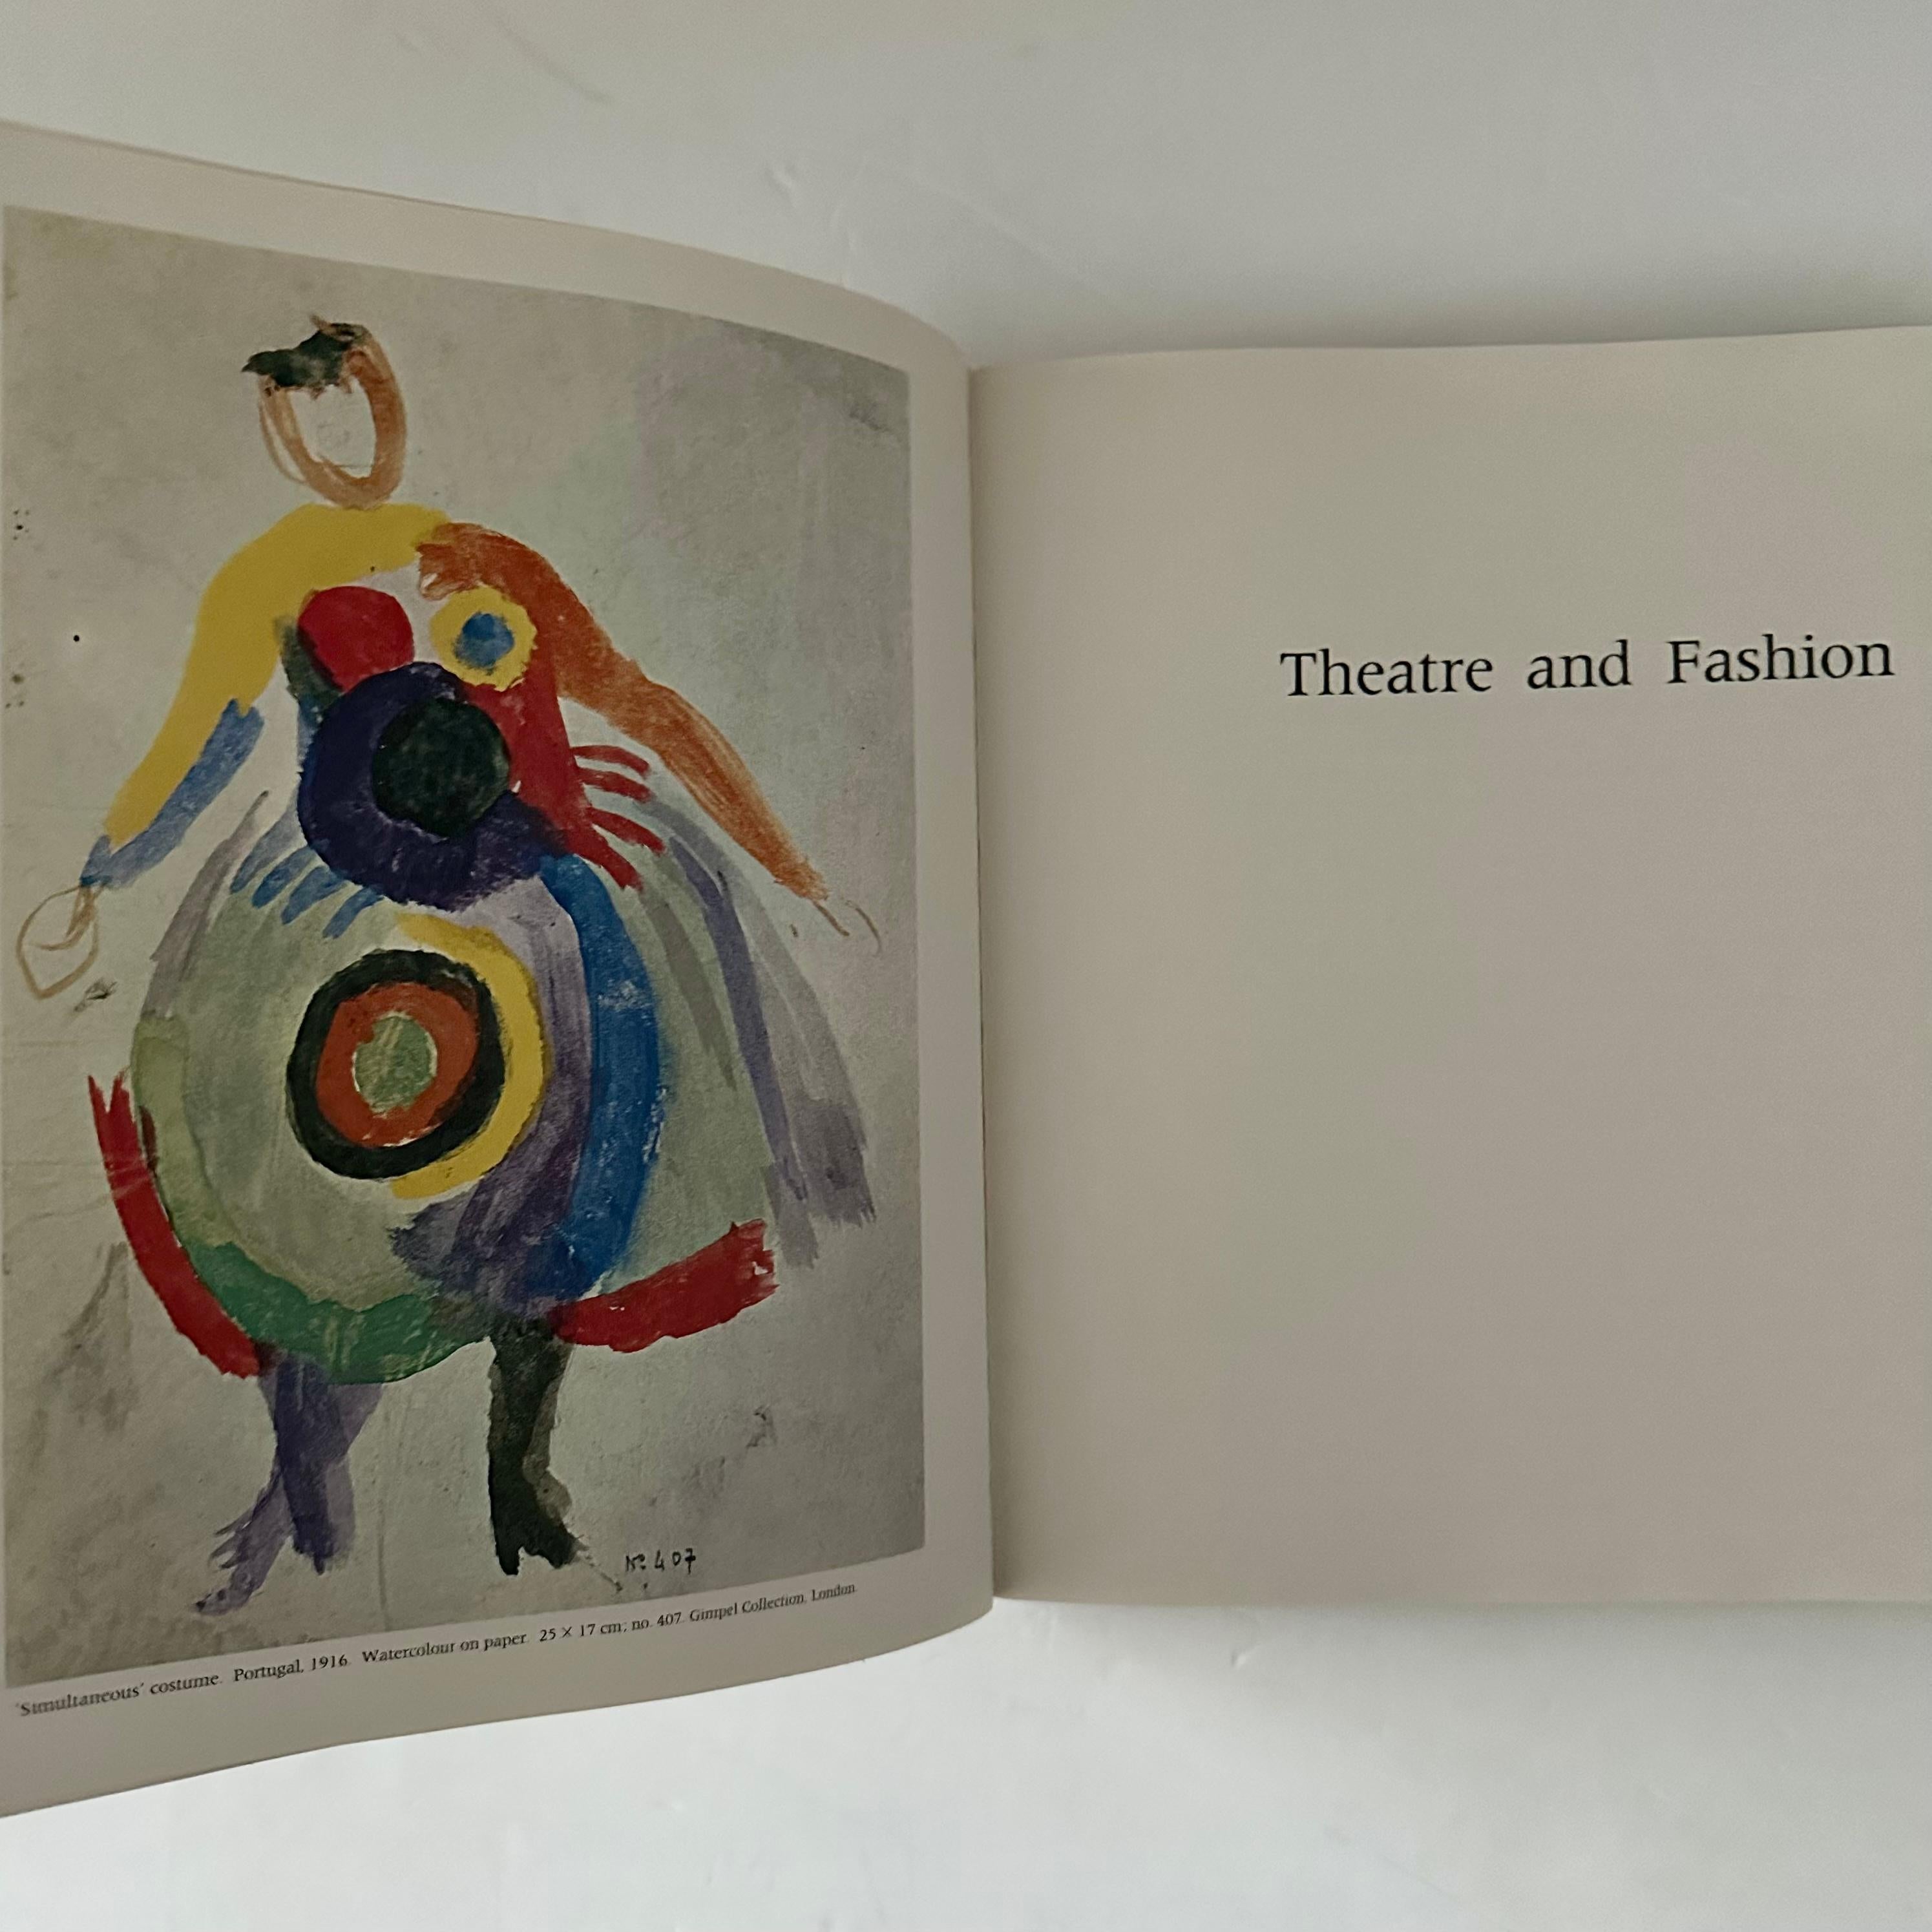 Published by Thames & Hudson, 1st UK edition, London, 1972. Hardback with English text, translated from the original French edition. 

One of the most definitive monographs on Sonia Delaunay’s life and work. This exceptional publication is profusely